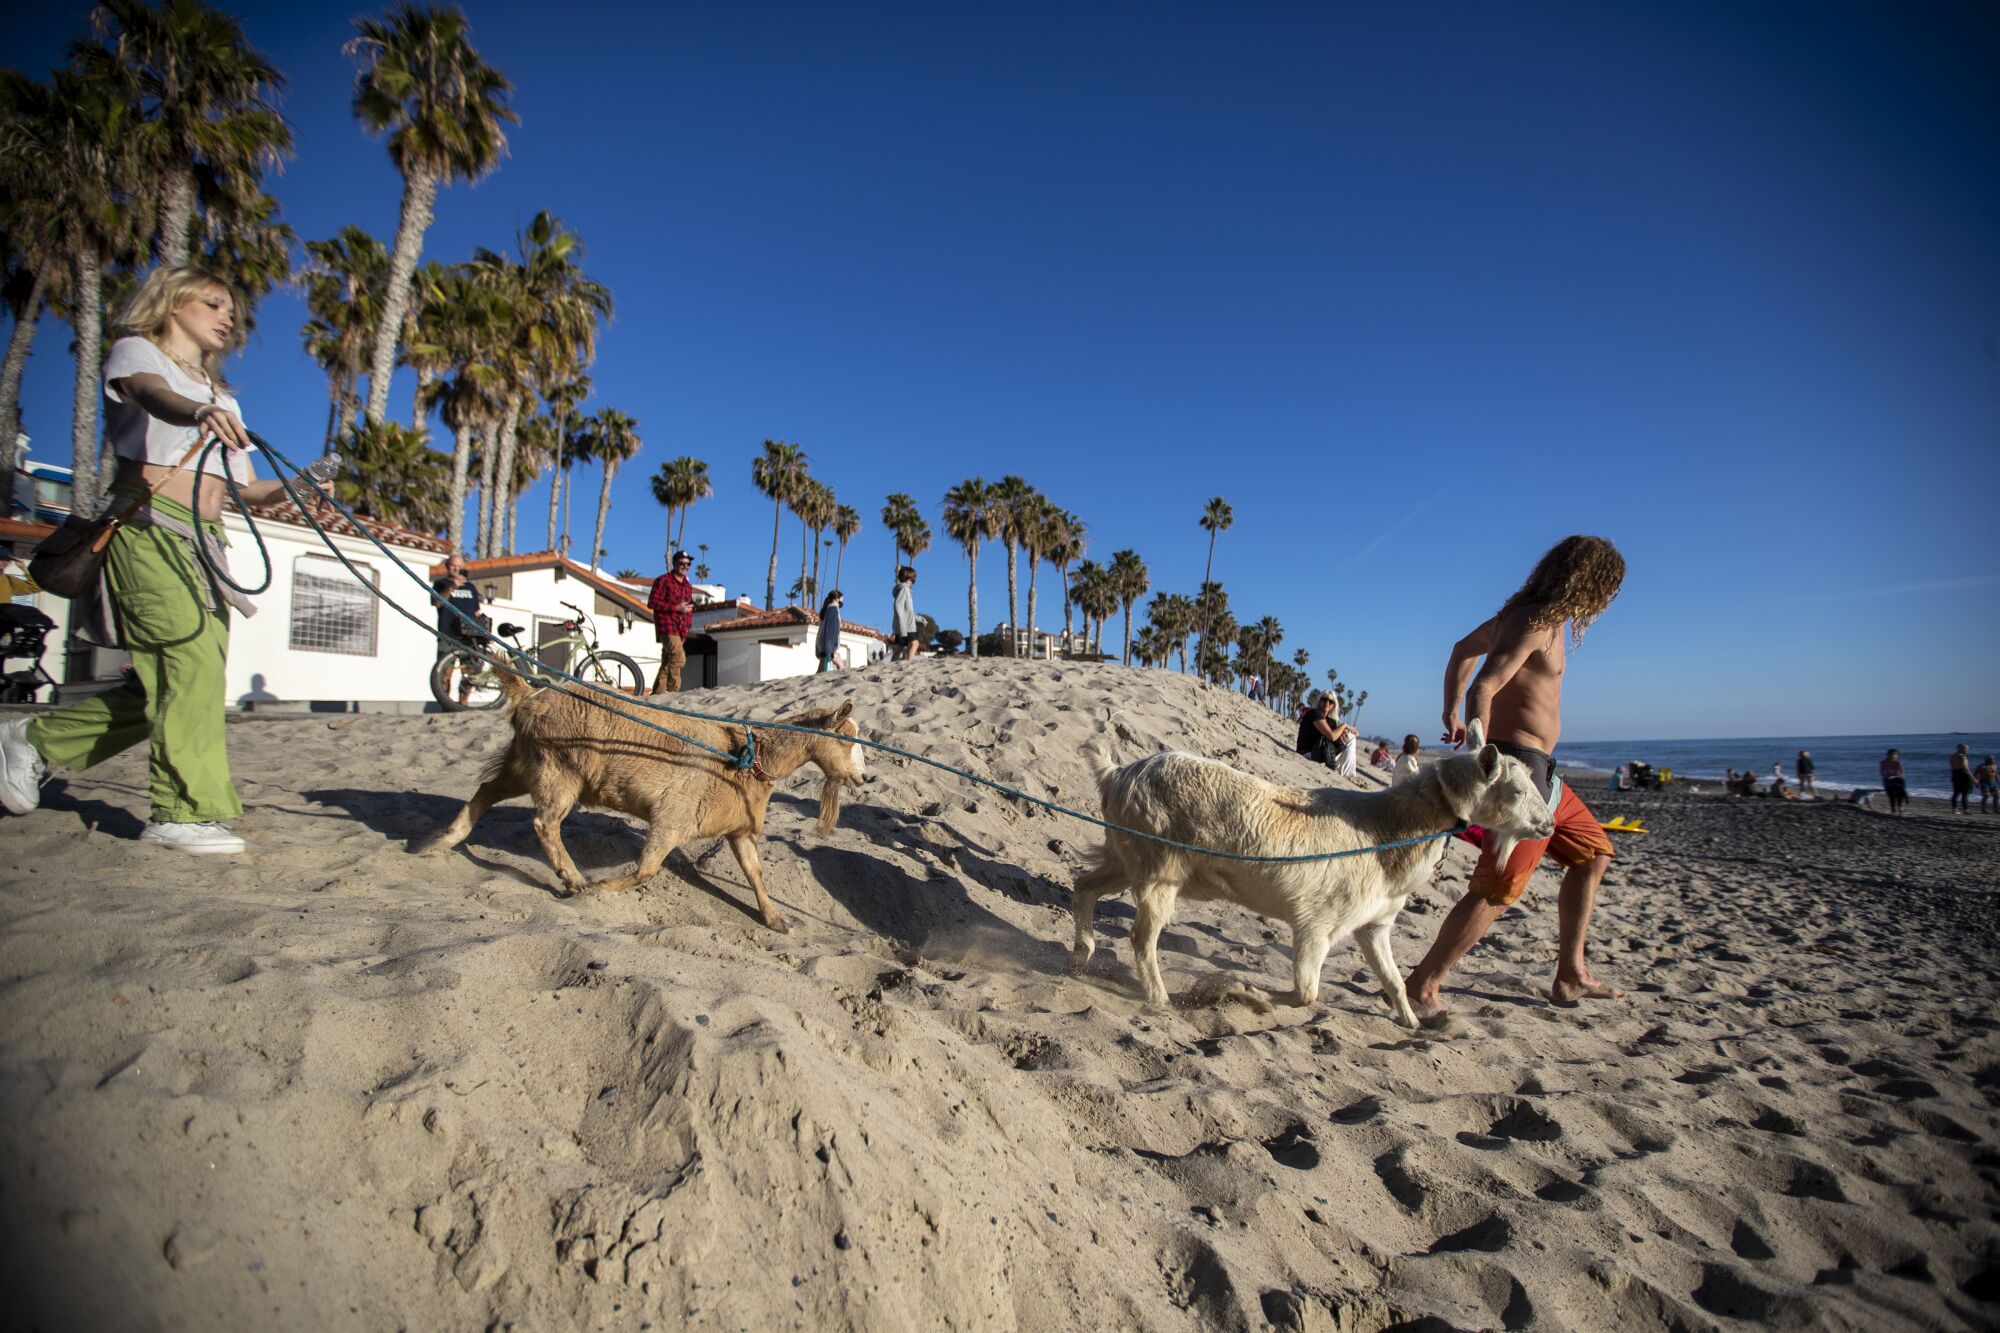  People with goats on the beach.